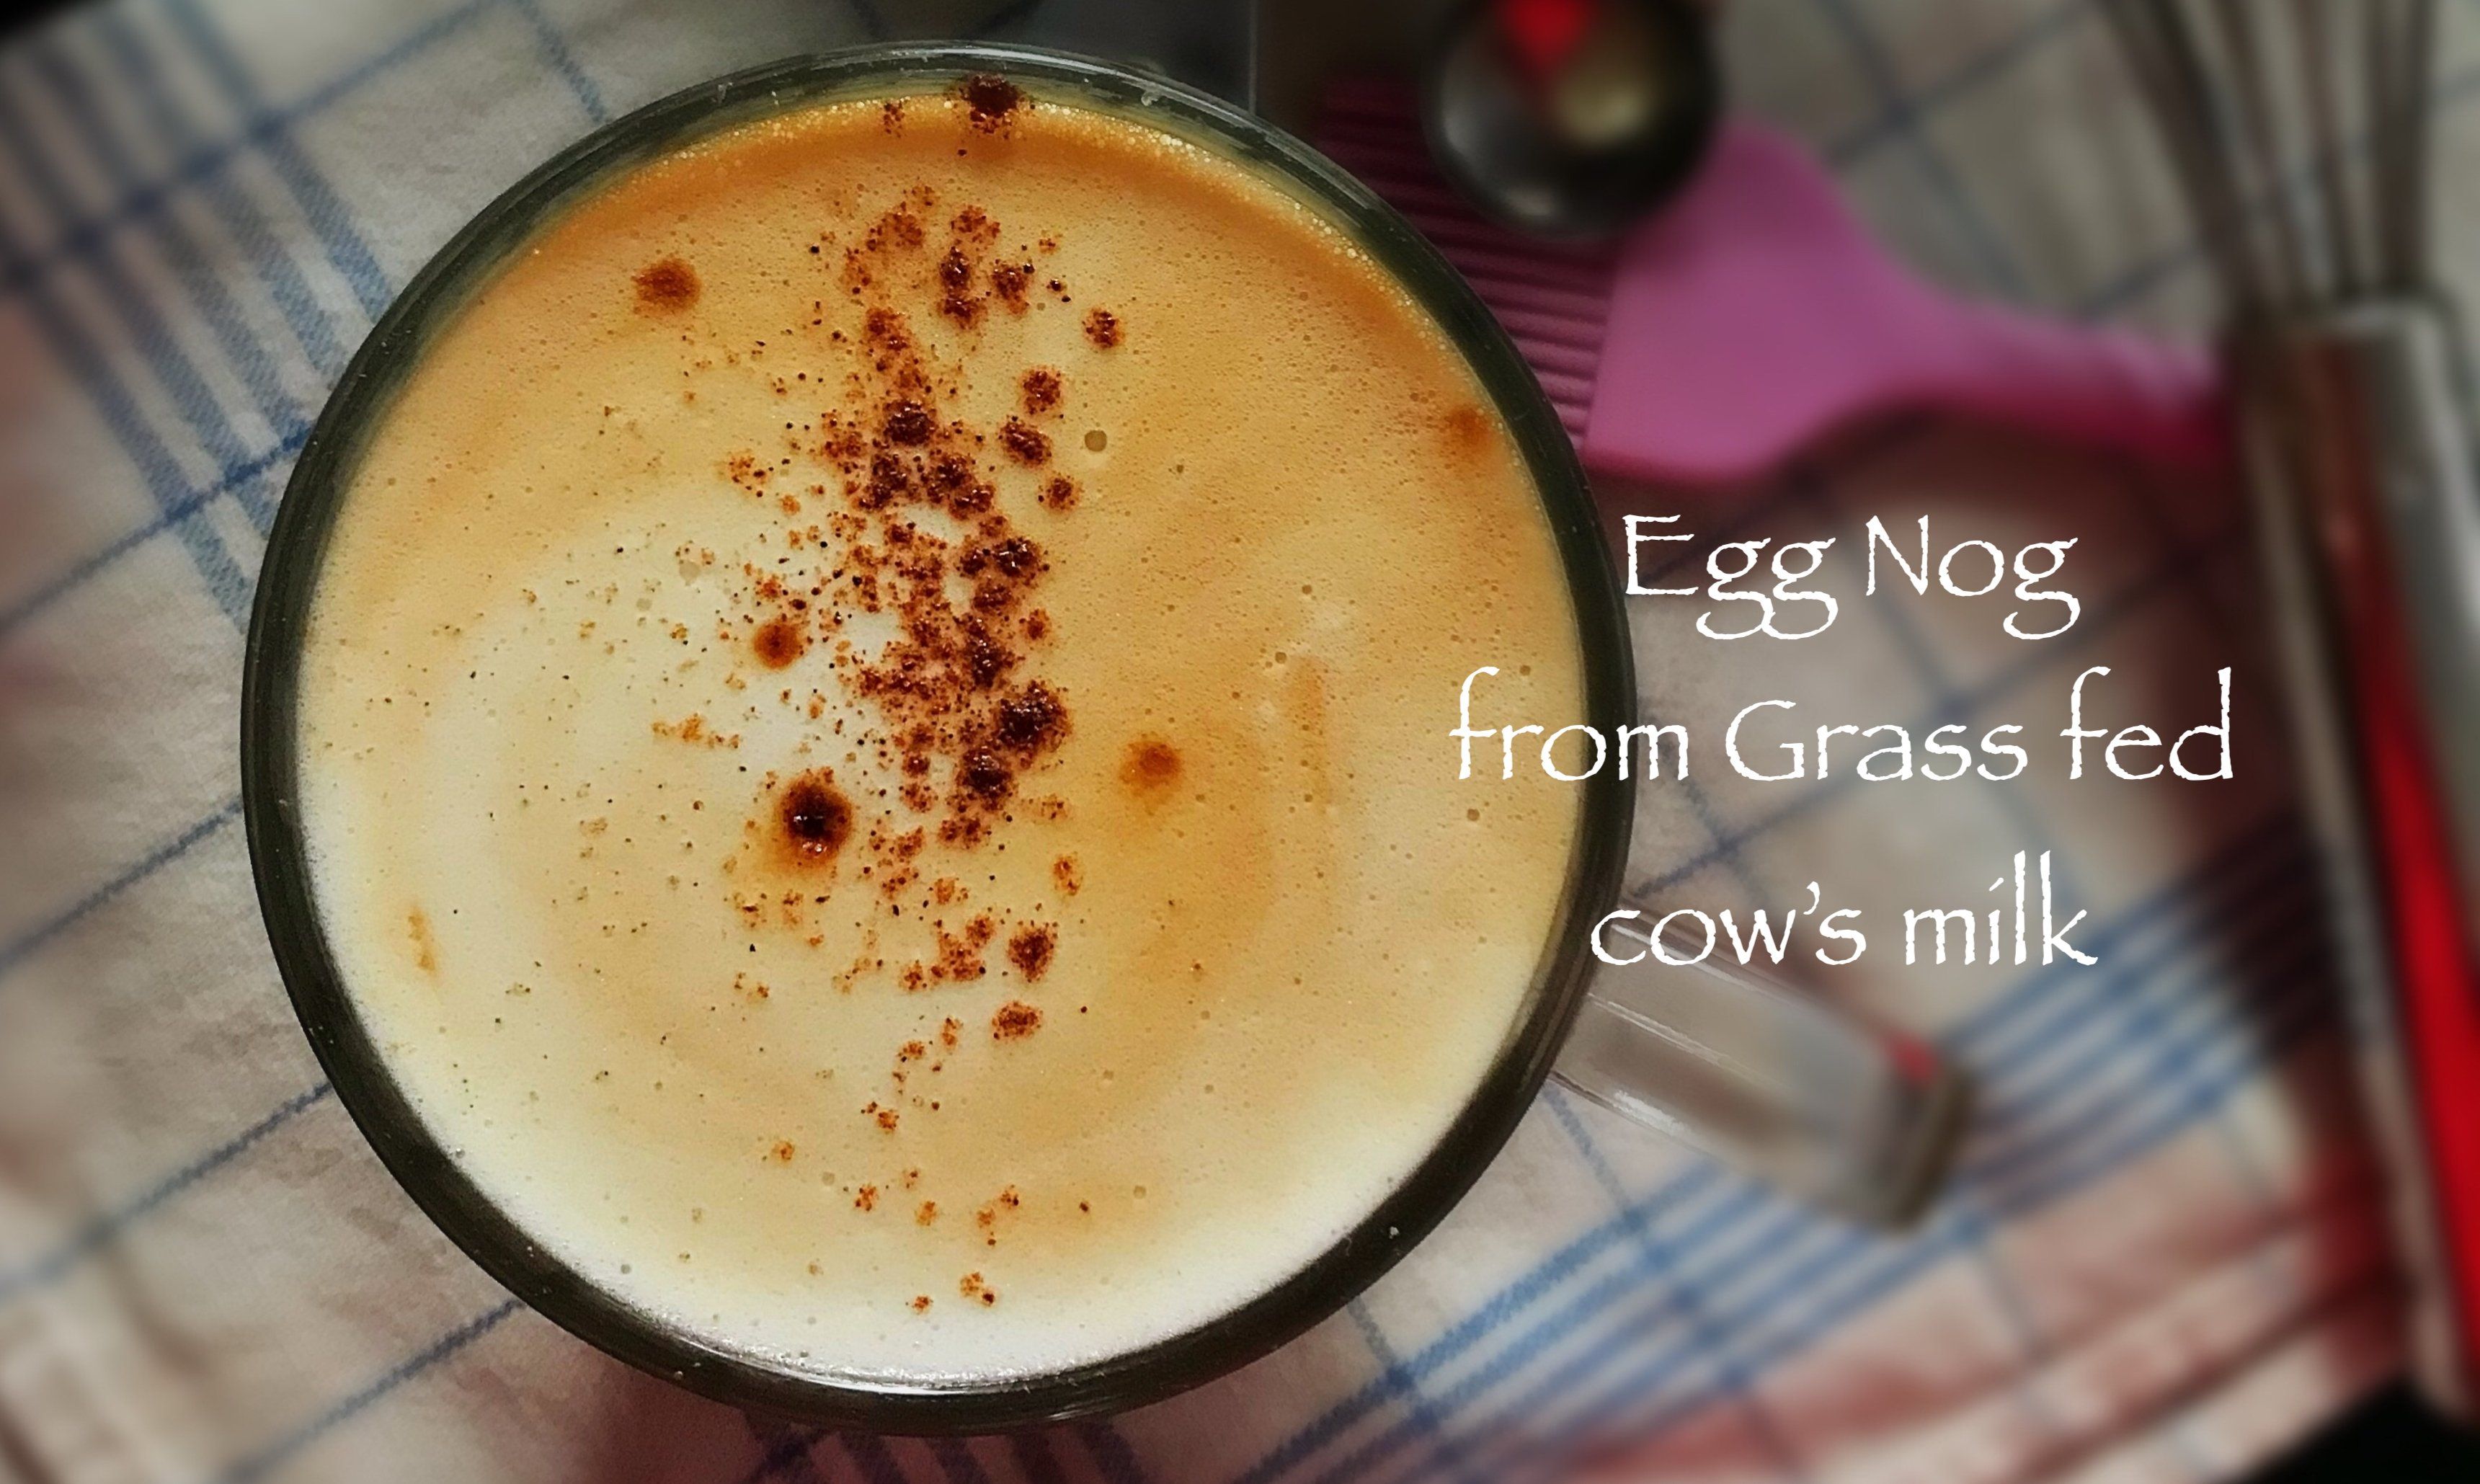 Previous Happening: Eggnog from Flint Hill Farm & Winter Share Update + Recipe